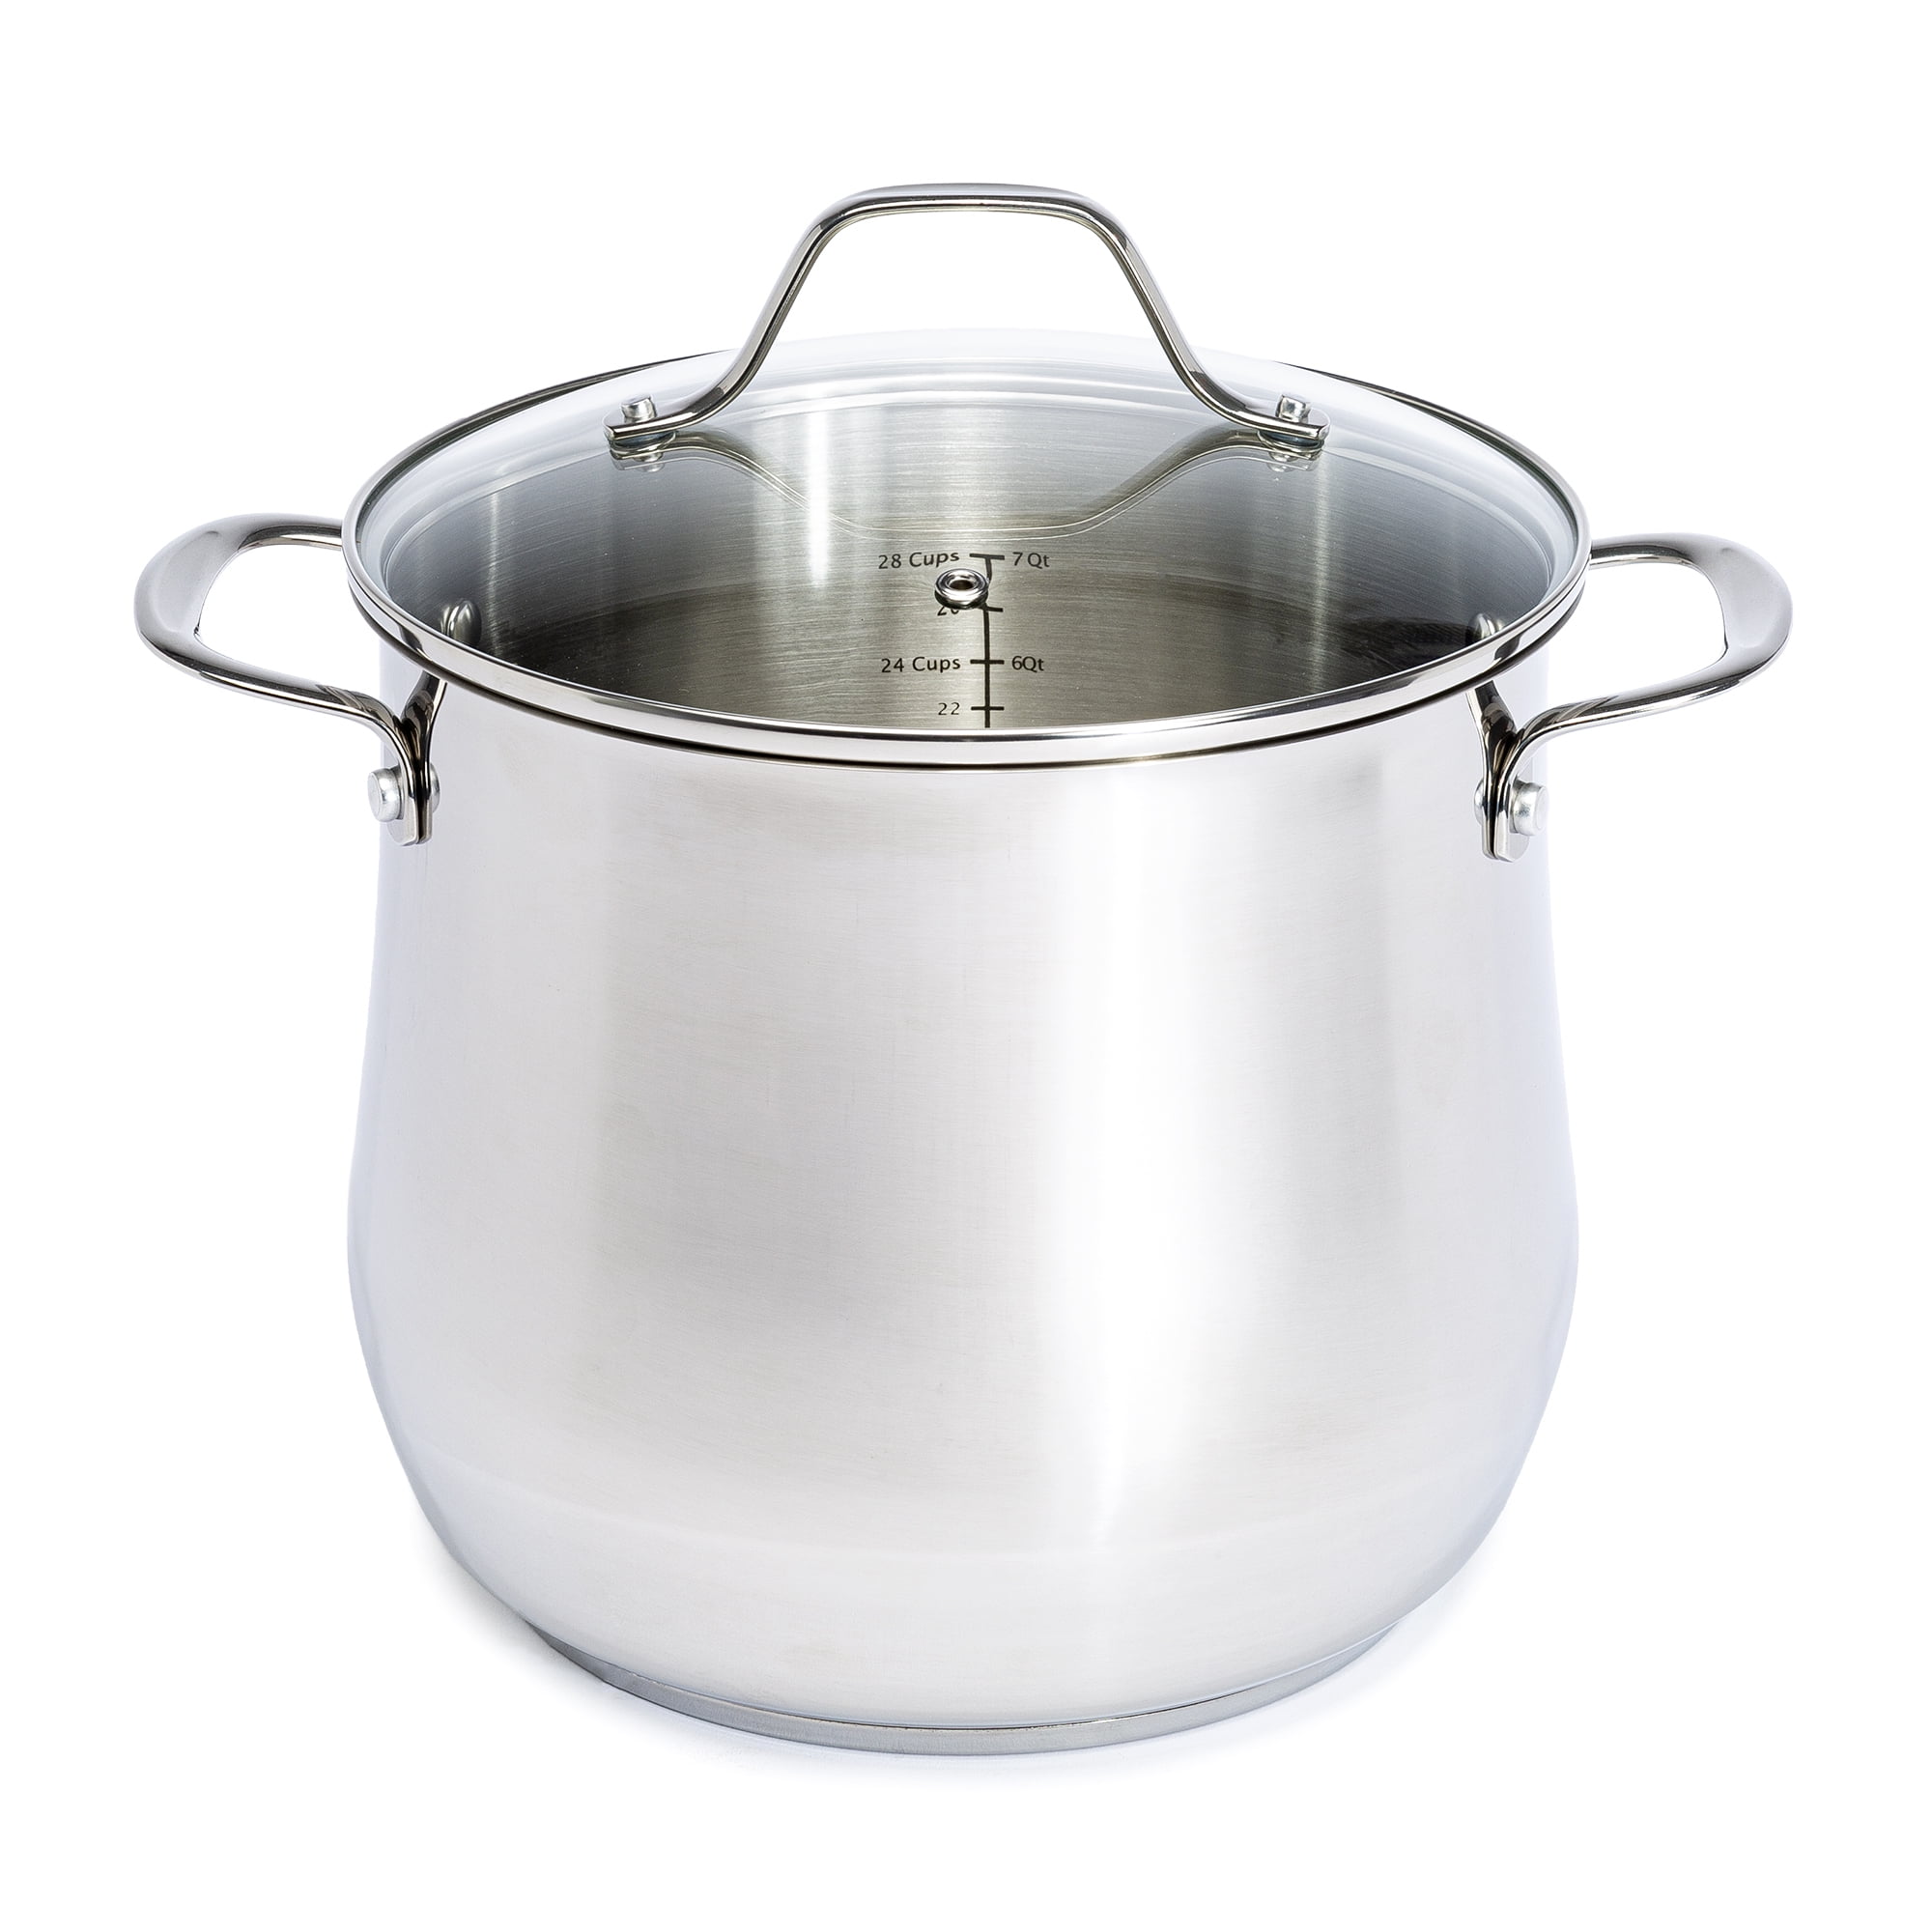 Lo-Heet Deluxe Tri-Ply Stainless Steel 8 quart Pot USA